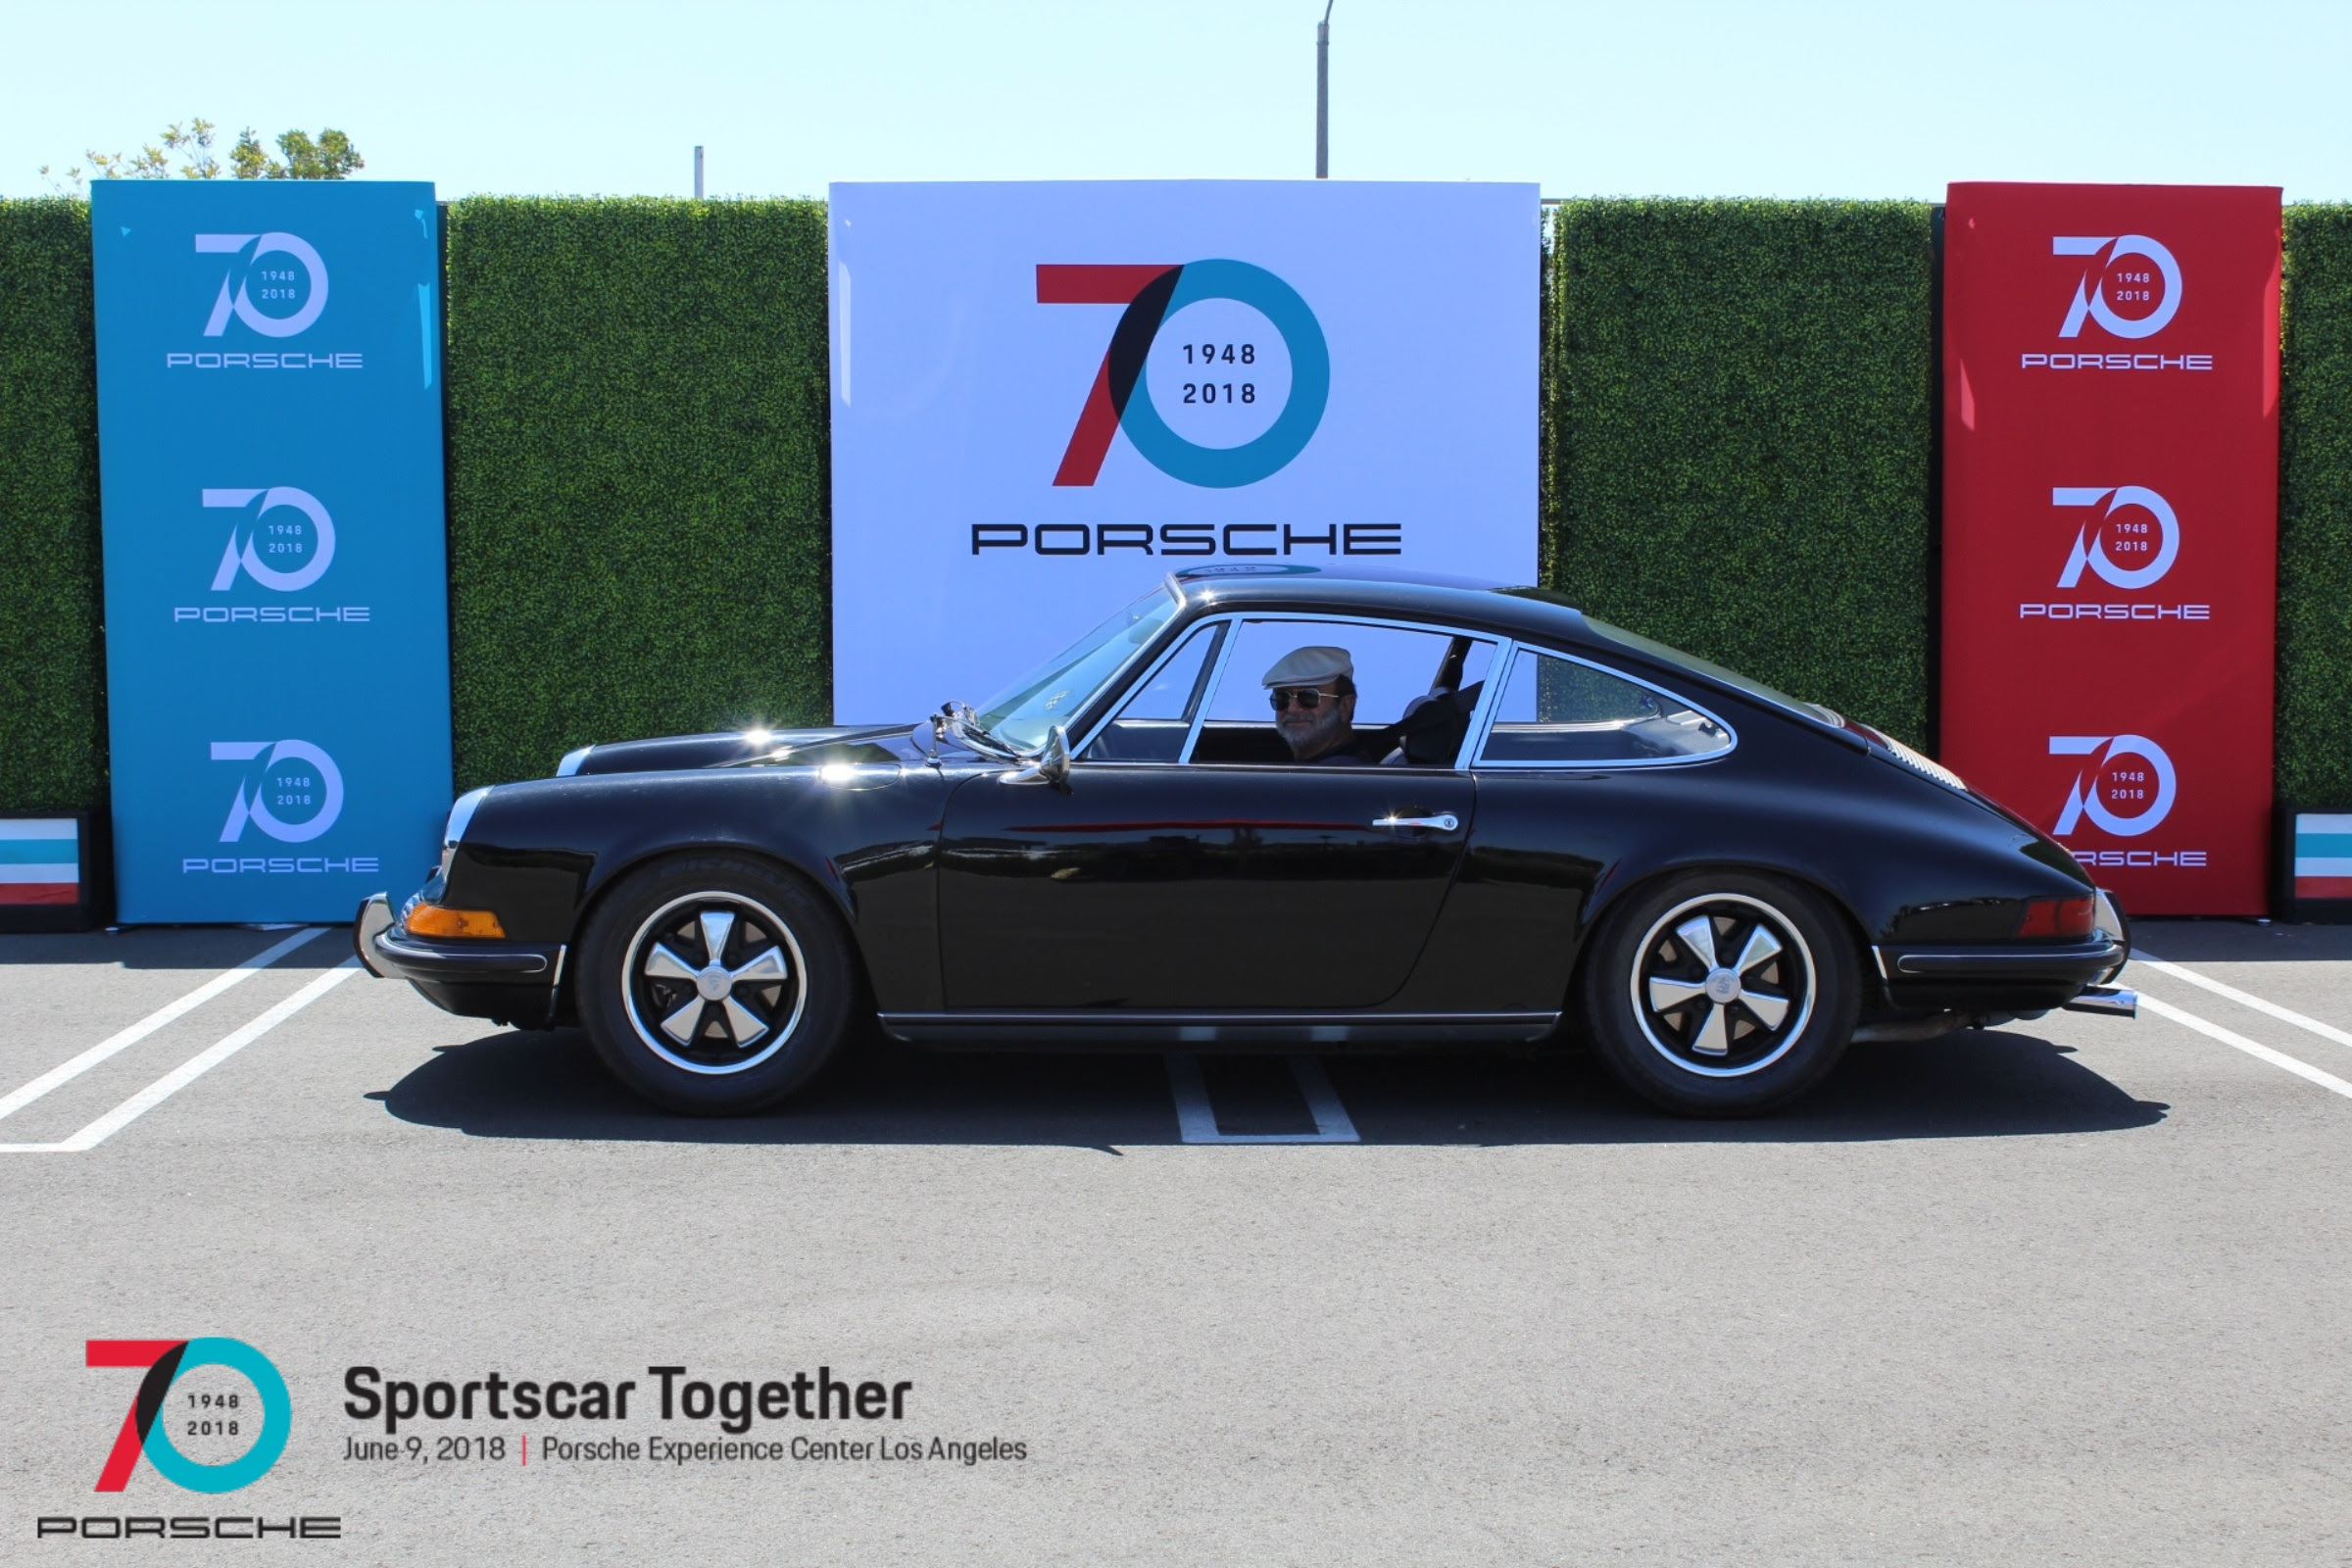 Augie Esposito AHRF July Member of the MonthPorsche 70th